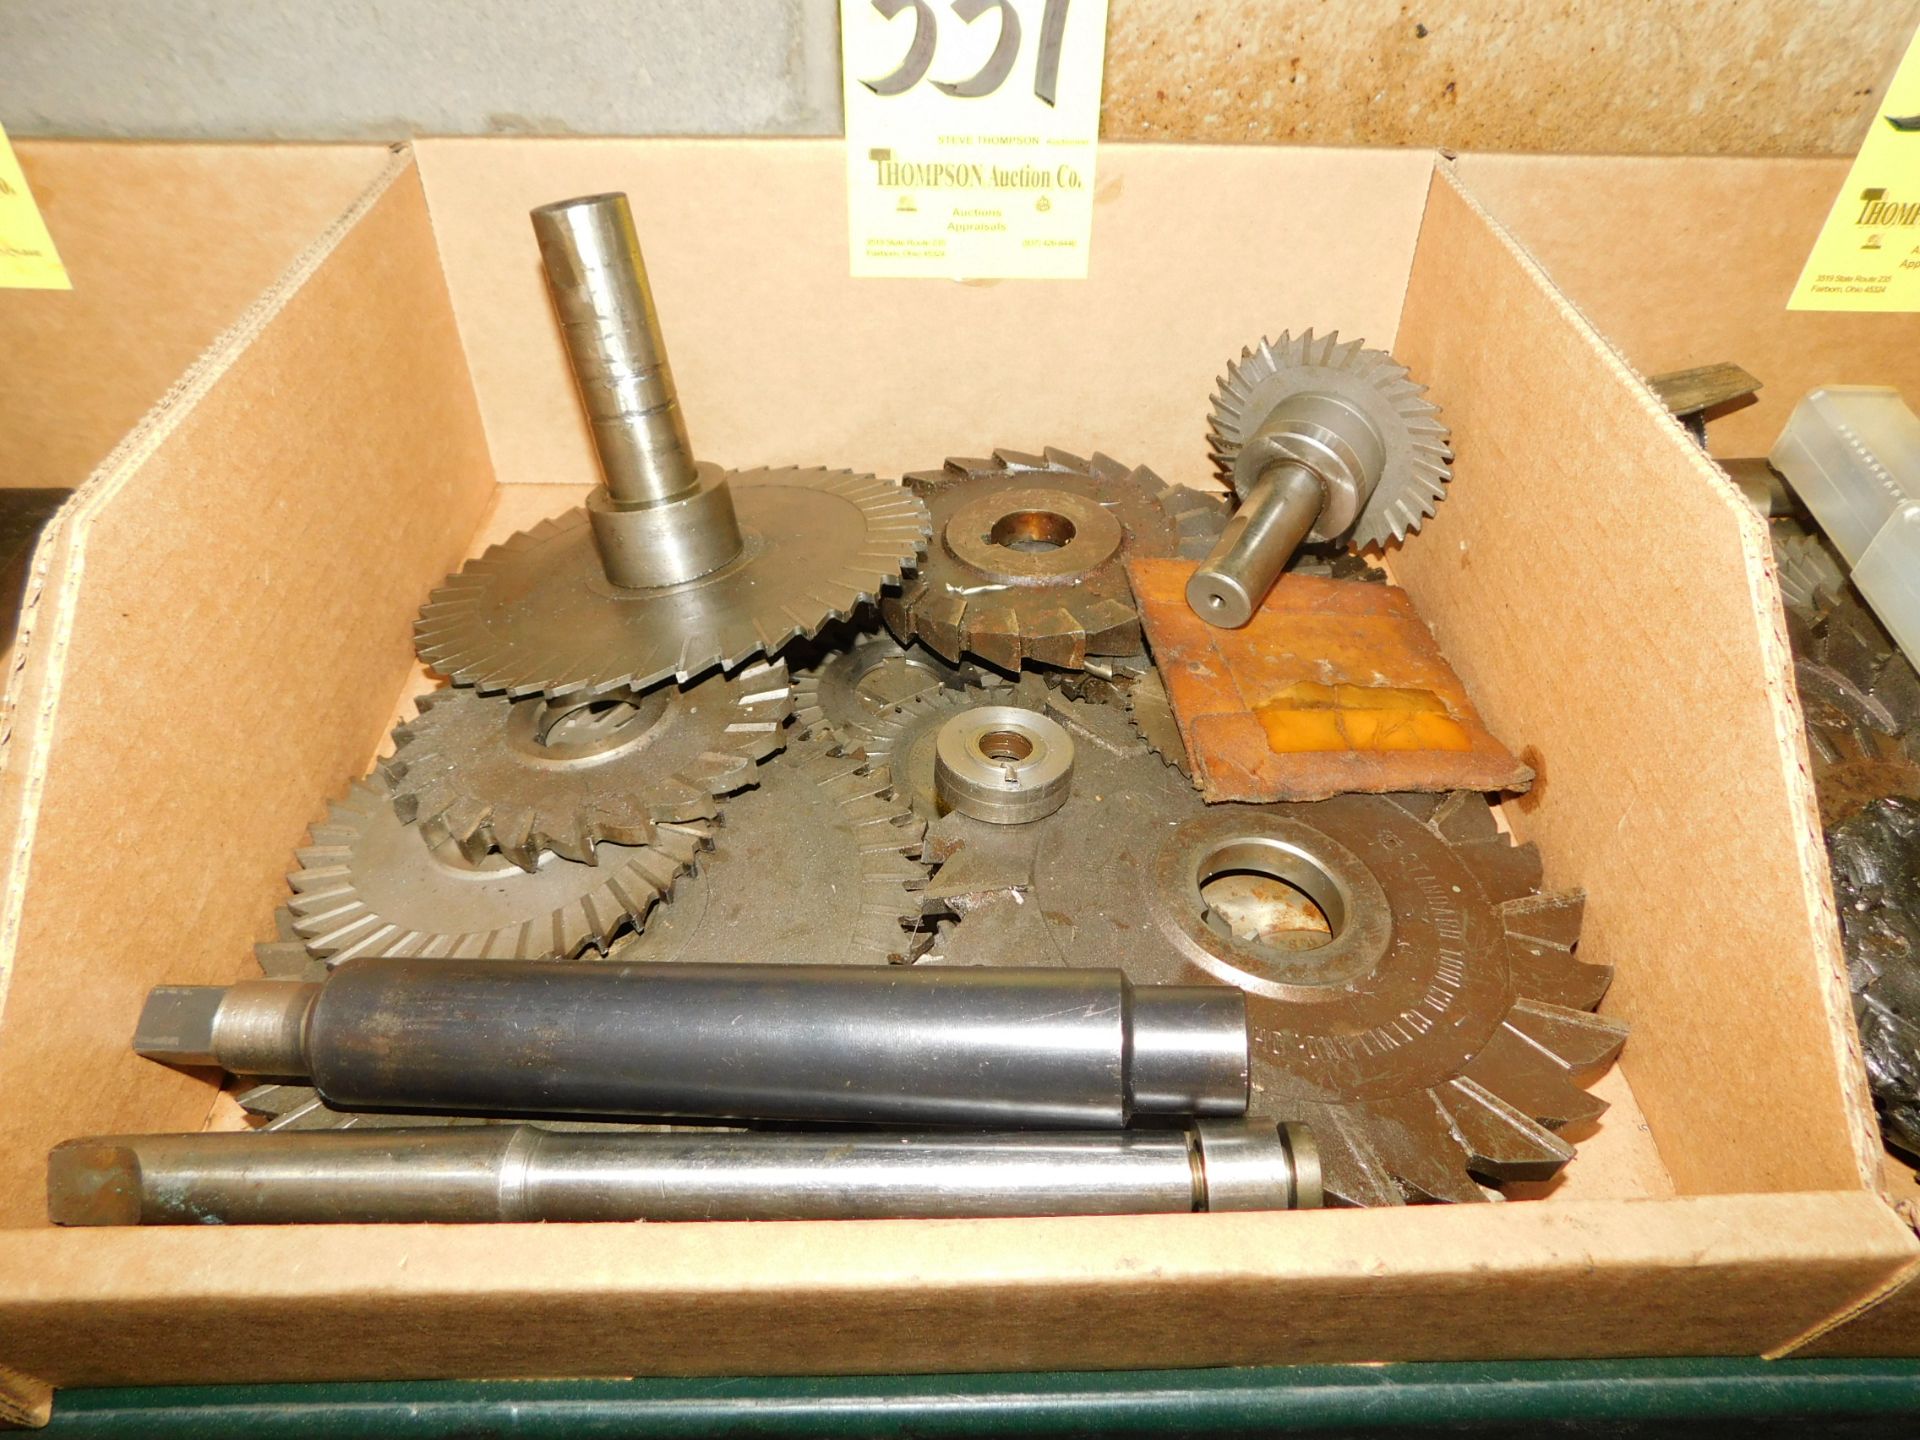 Milling Cutters